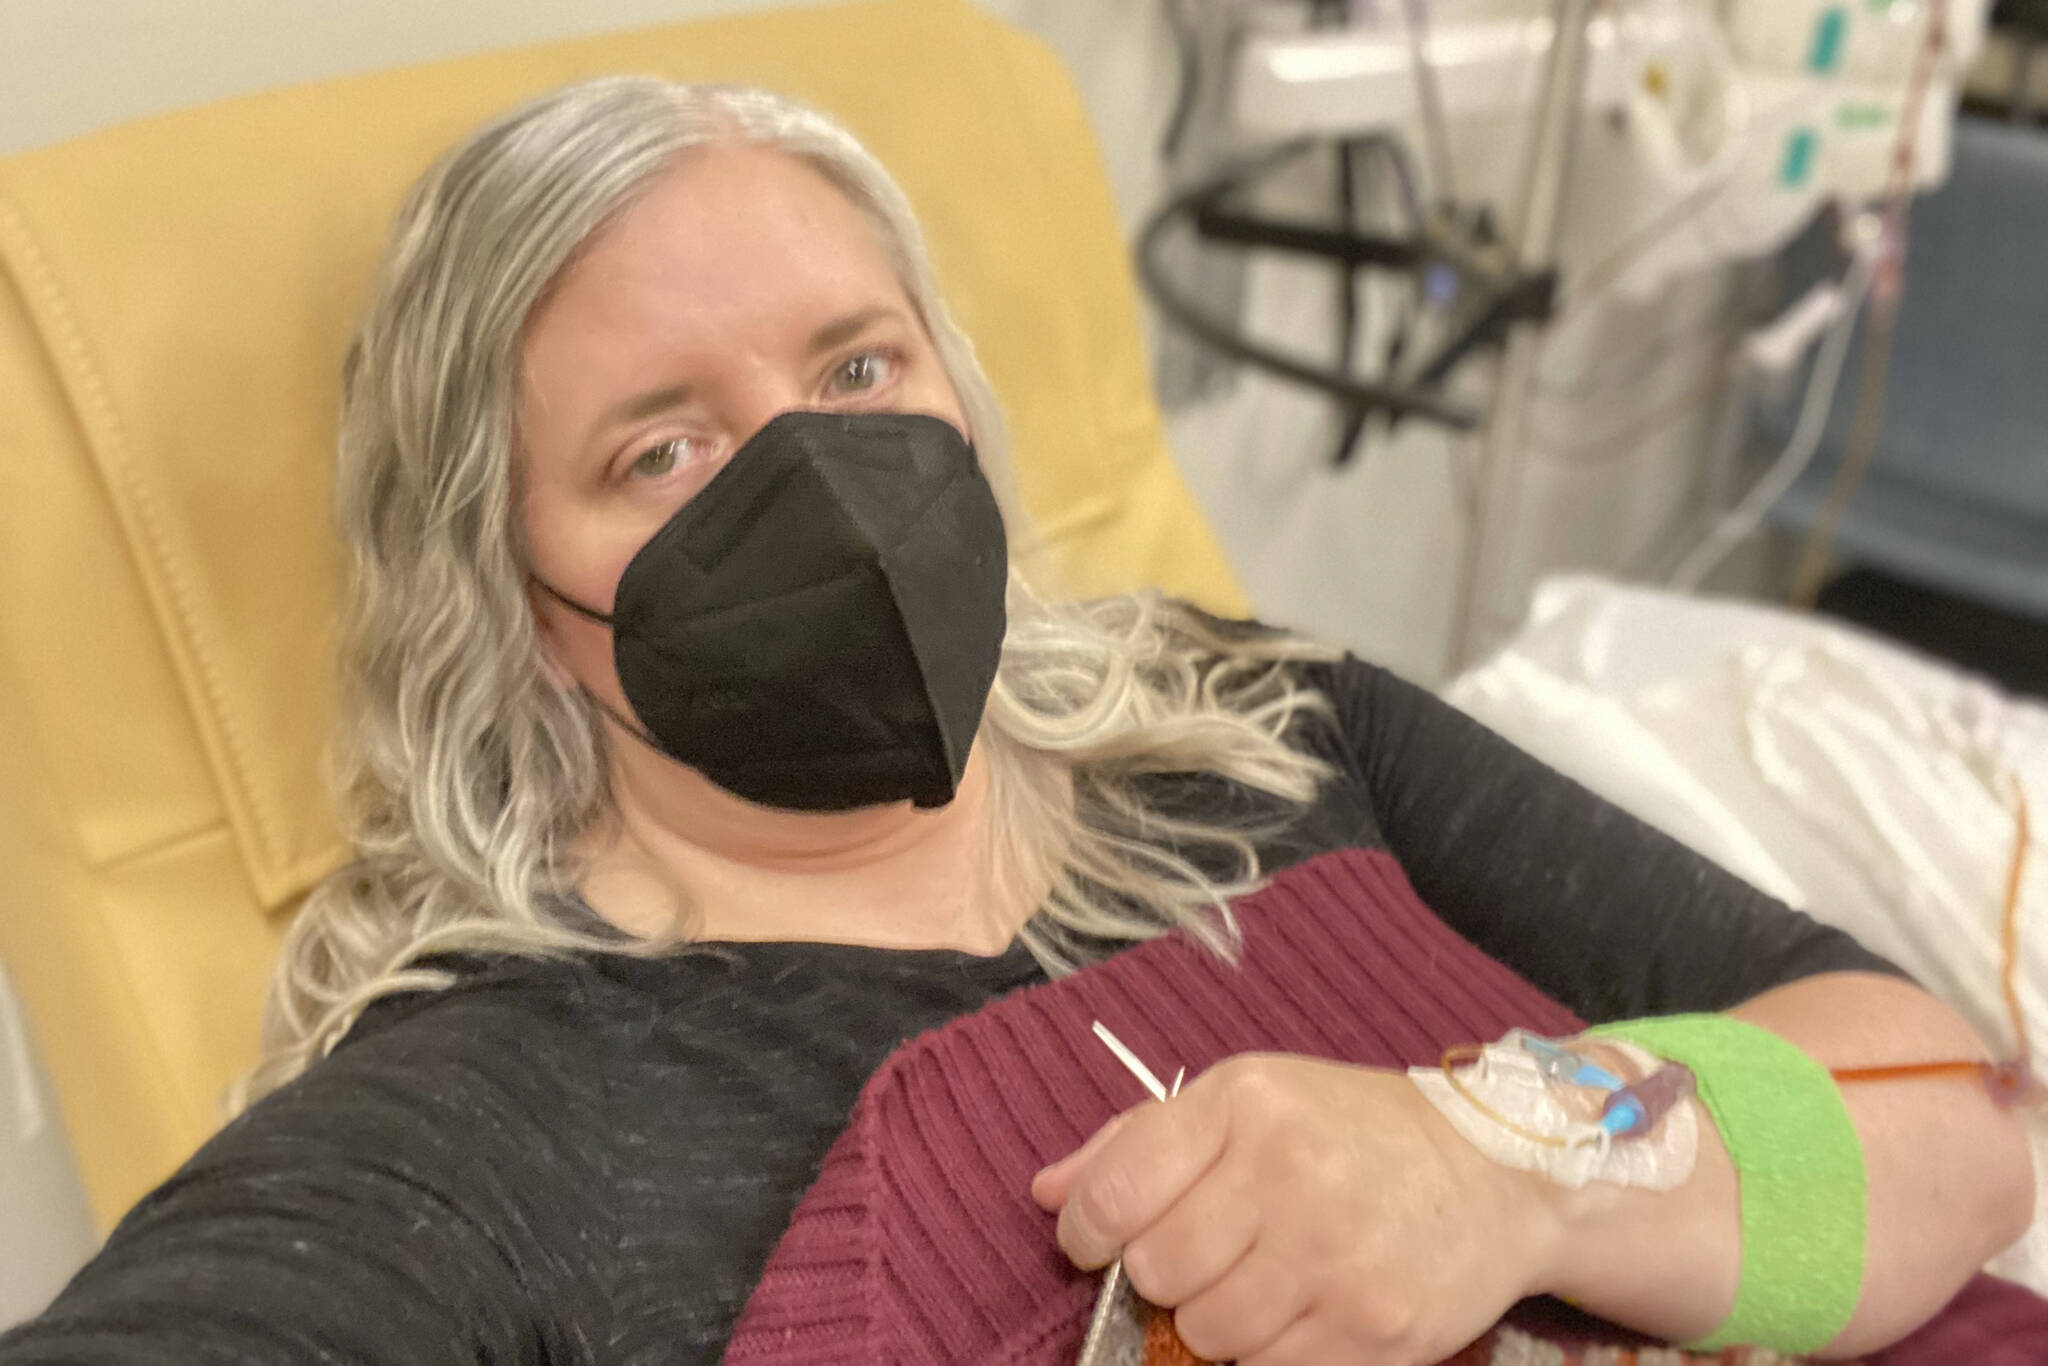 This photo provided by Amy Watson of Portland, Ore., shows her during an iron infusion in December 2022. Watson, approaching 50, says she has “never had any kind of recovery” from COVID-19. She has had severe migraines, plus digestive, nerve and foot problems. Recently she developed severe anemia. (Amy Watson)